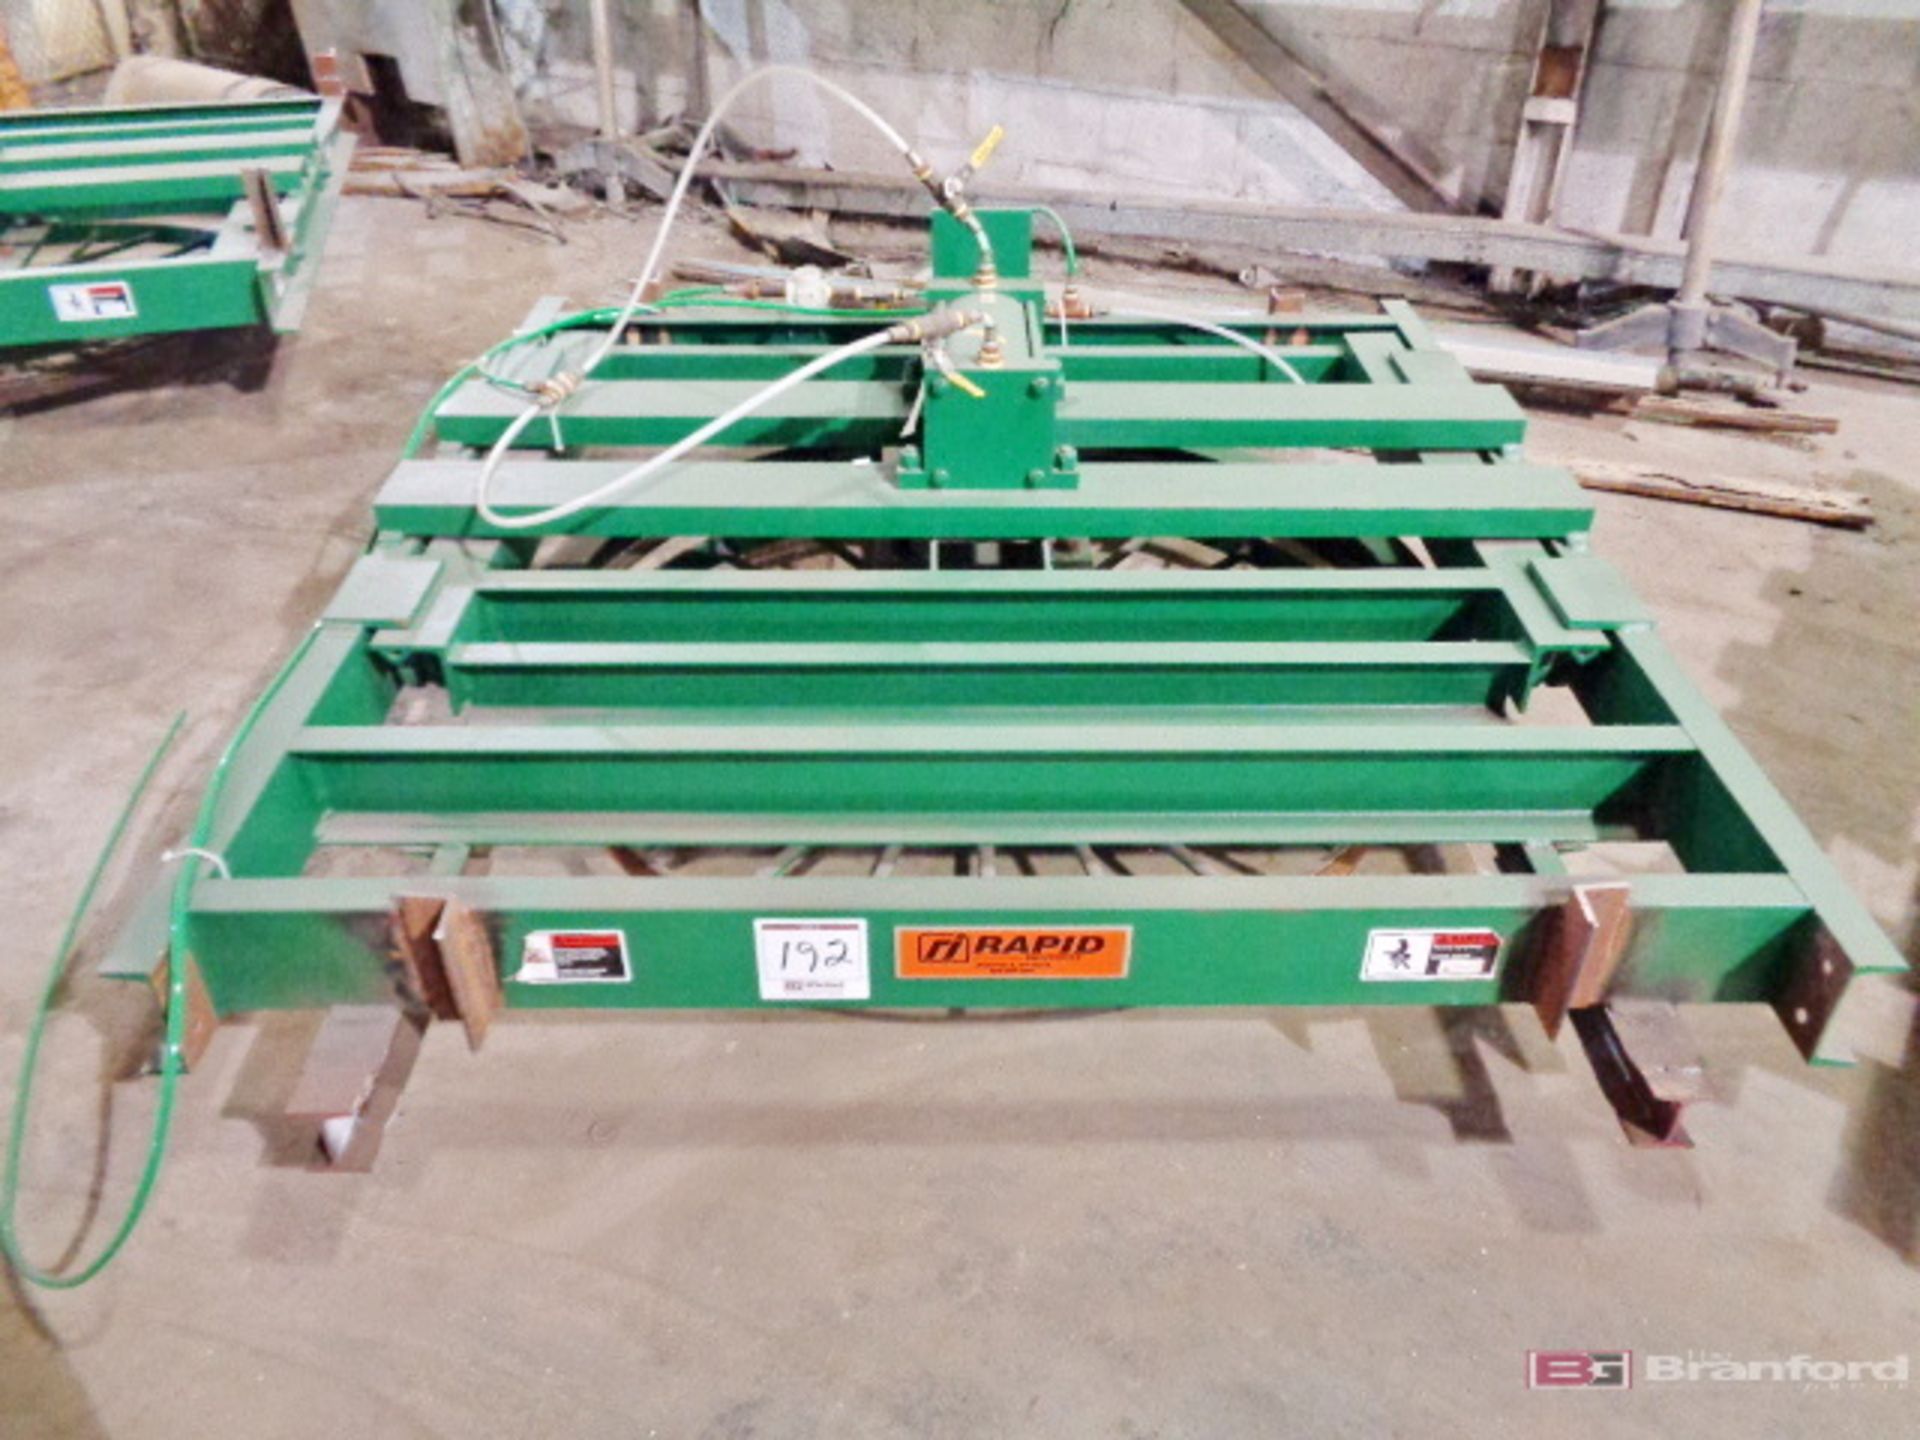 (1) Rapid Ceiling Hung Conveyor Turn Section